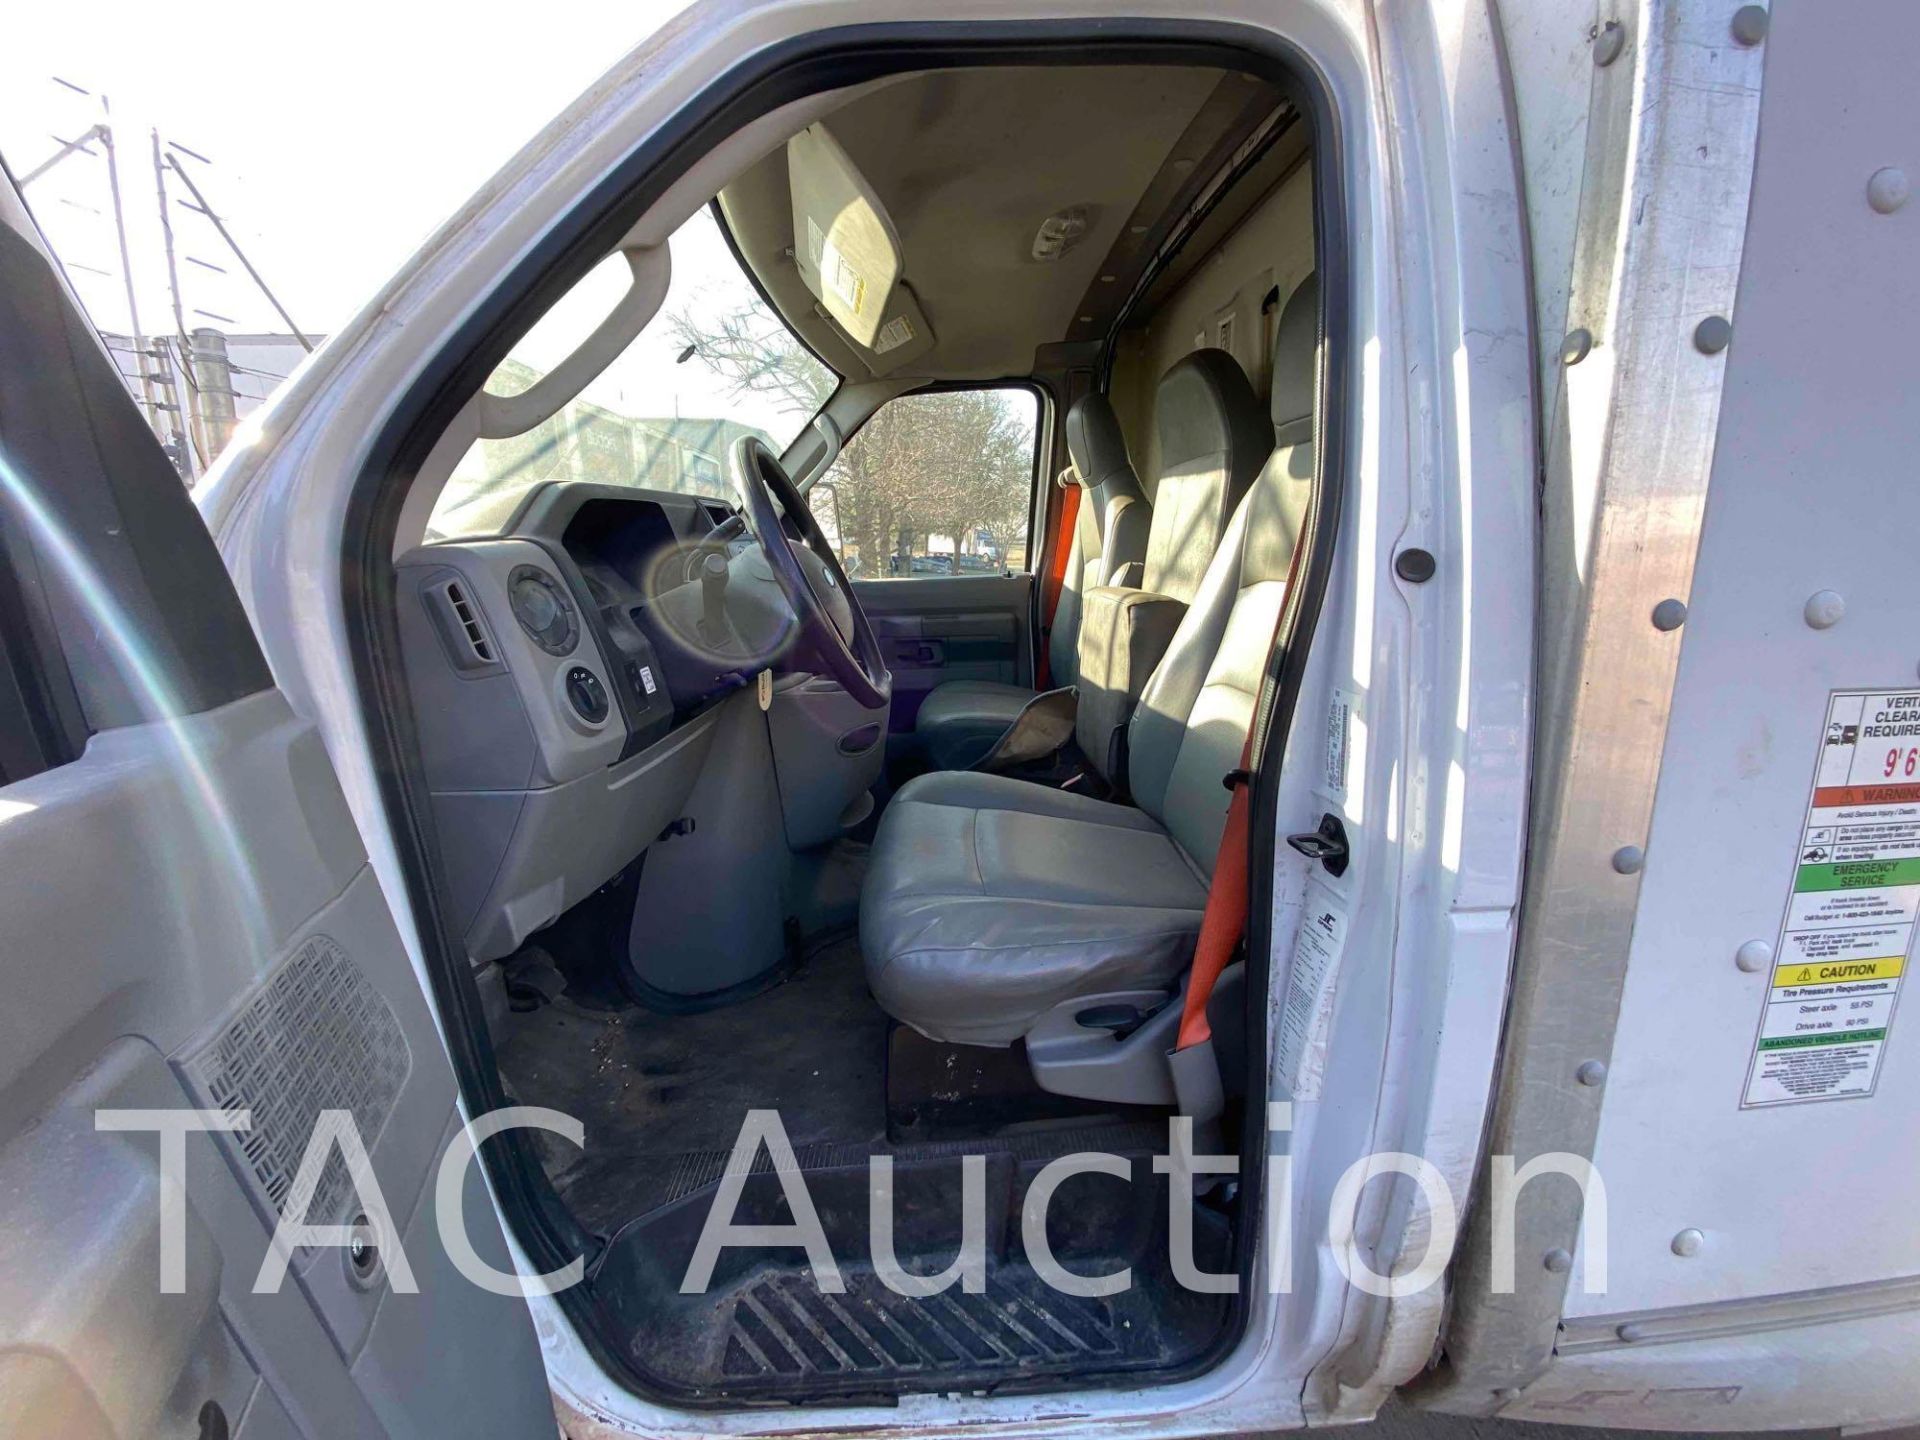 2014 Ford E-350 Box Truck - Image 12 of 51